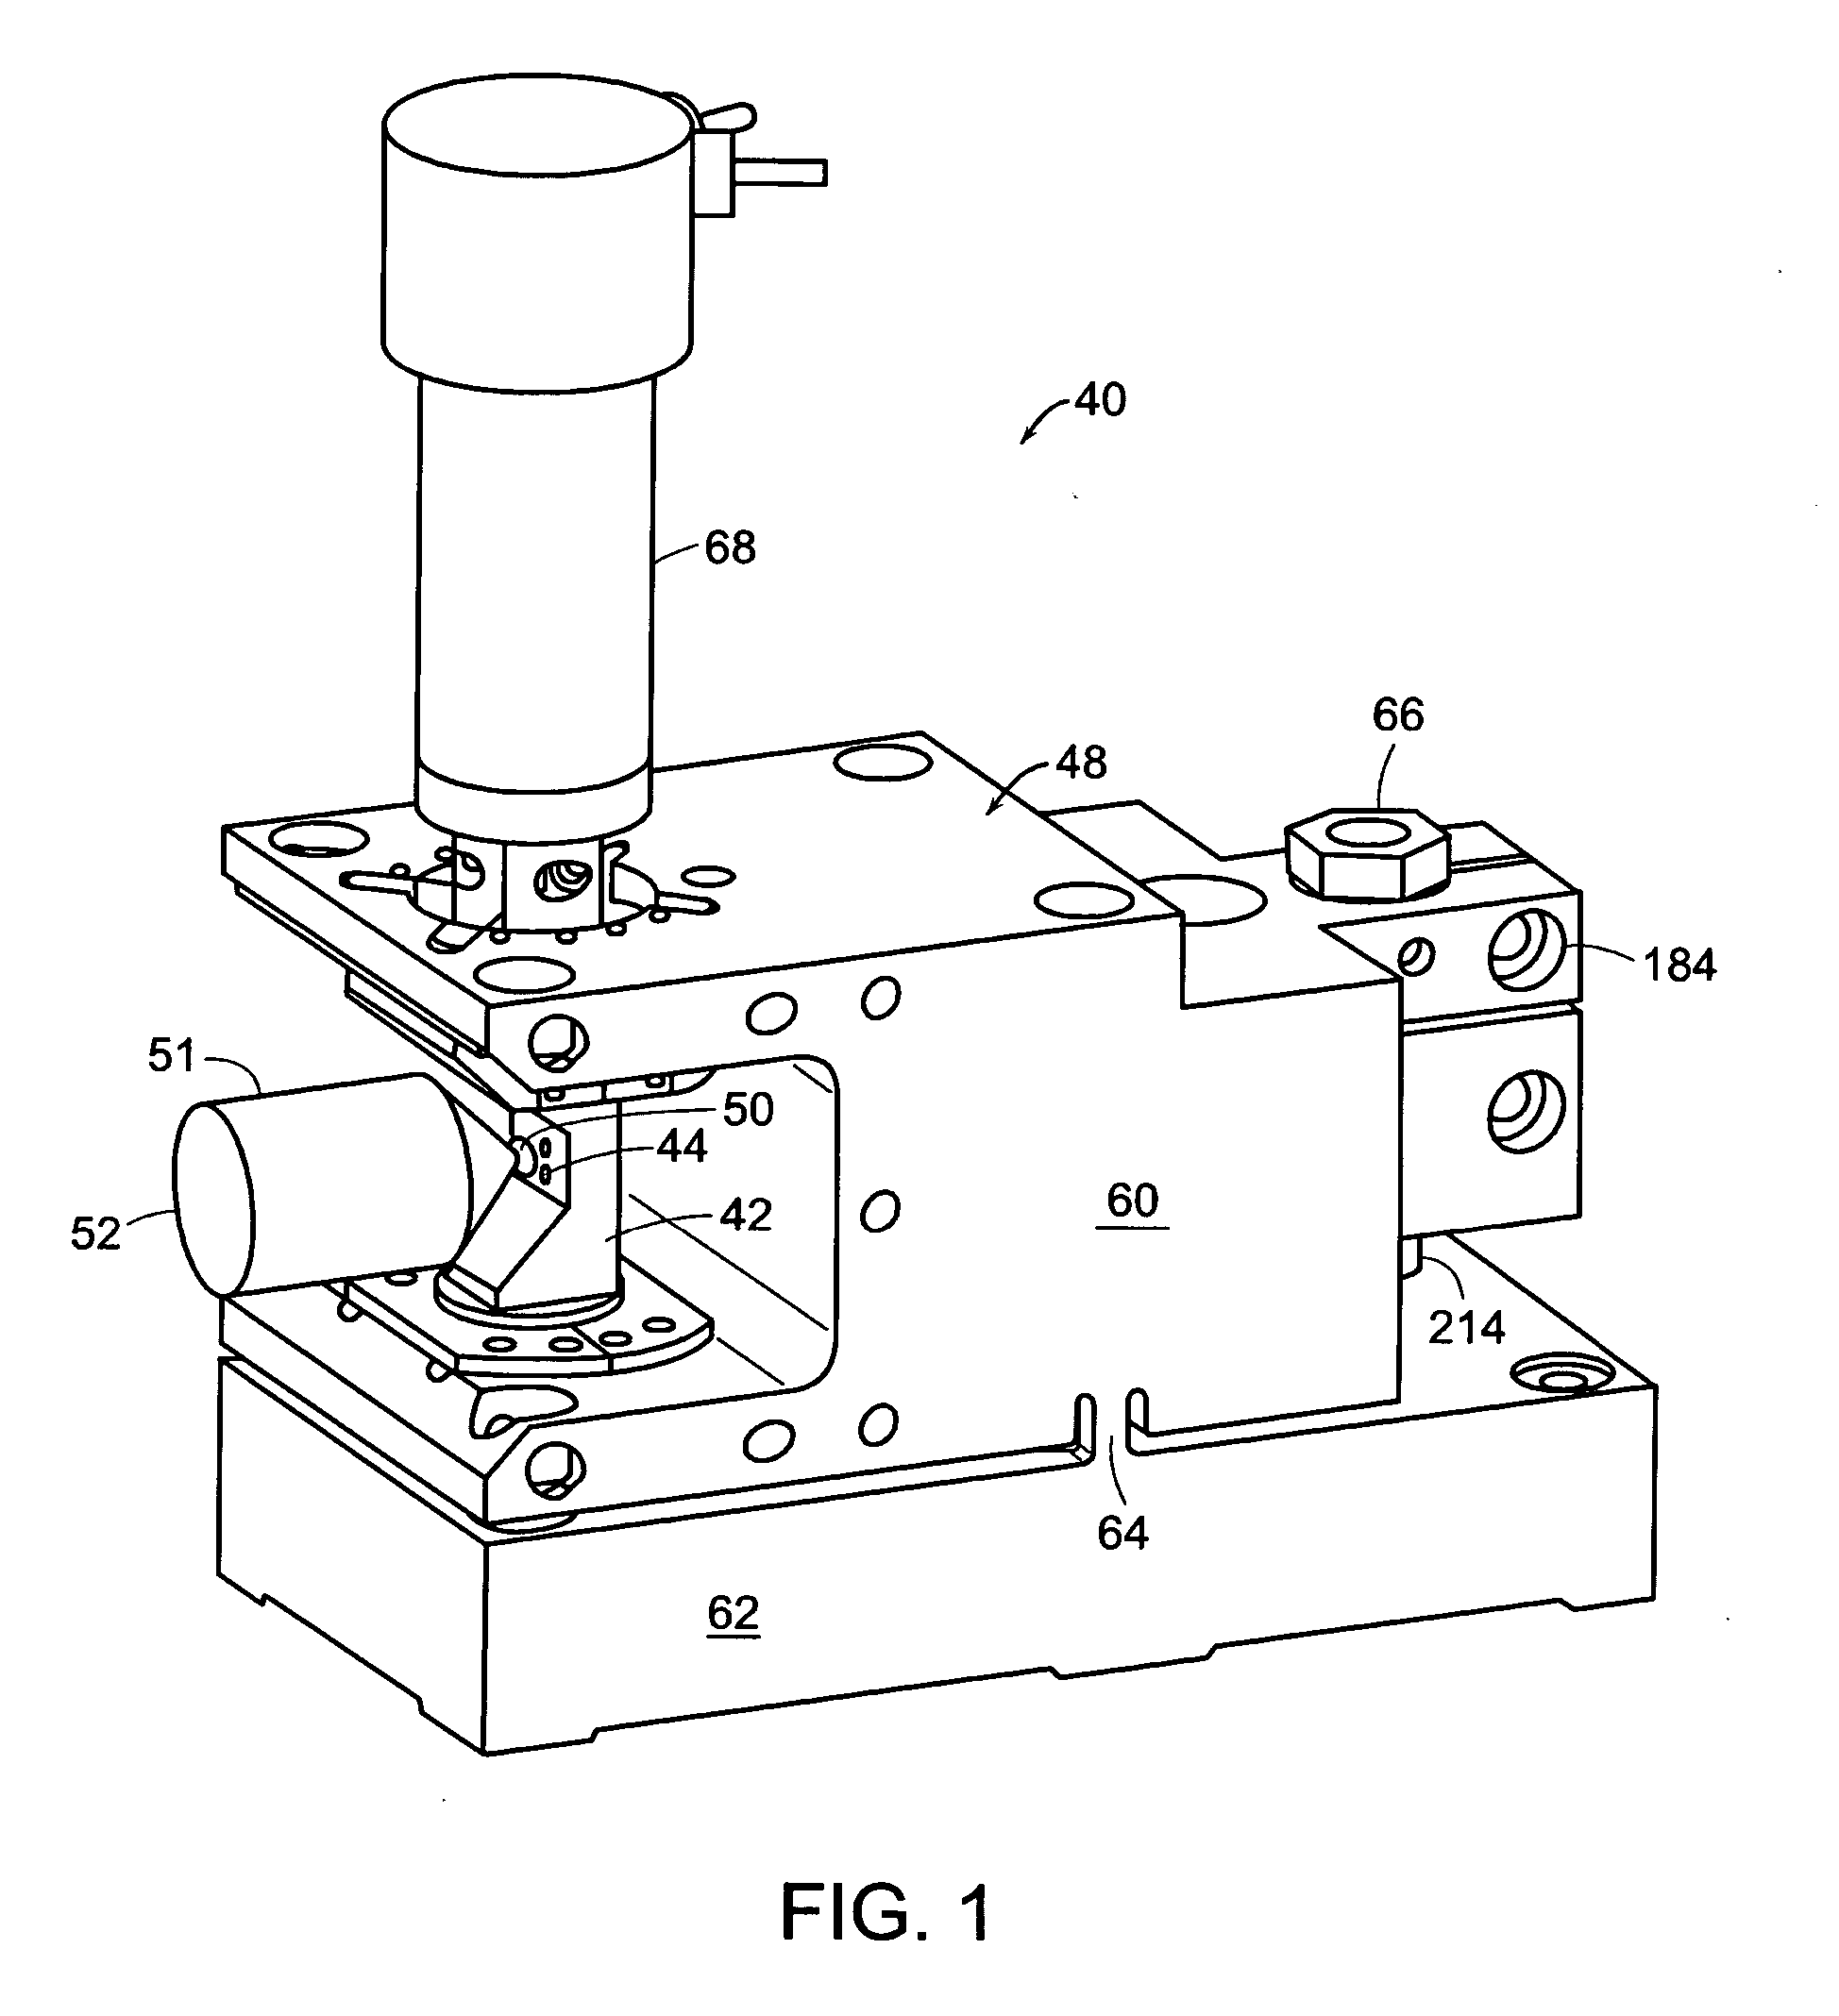 Rotary fast tool servo system and methods